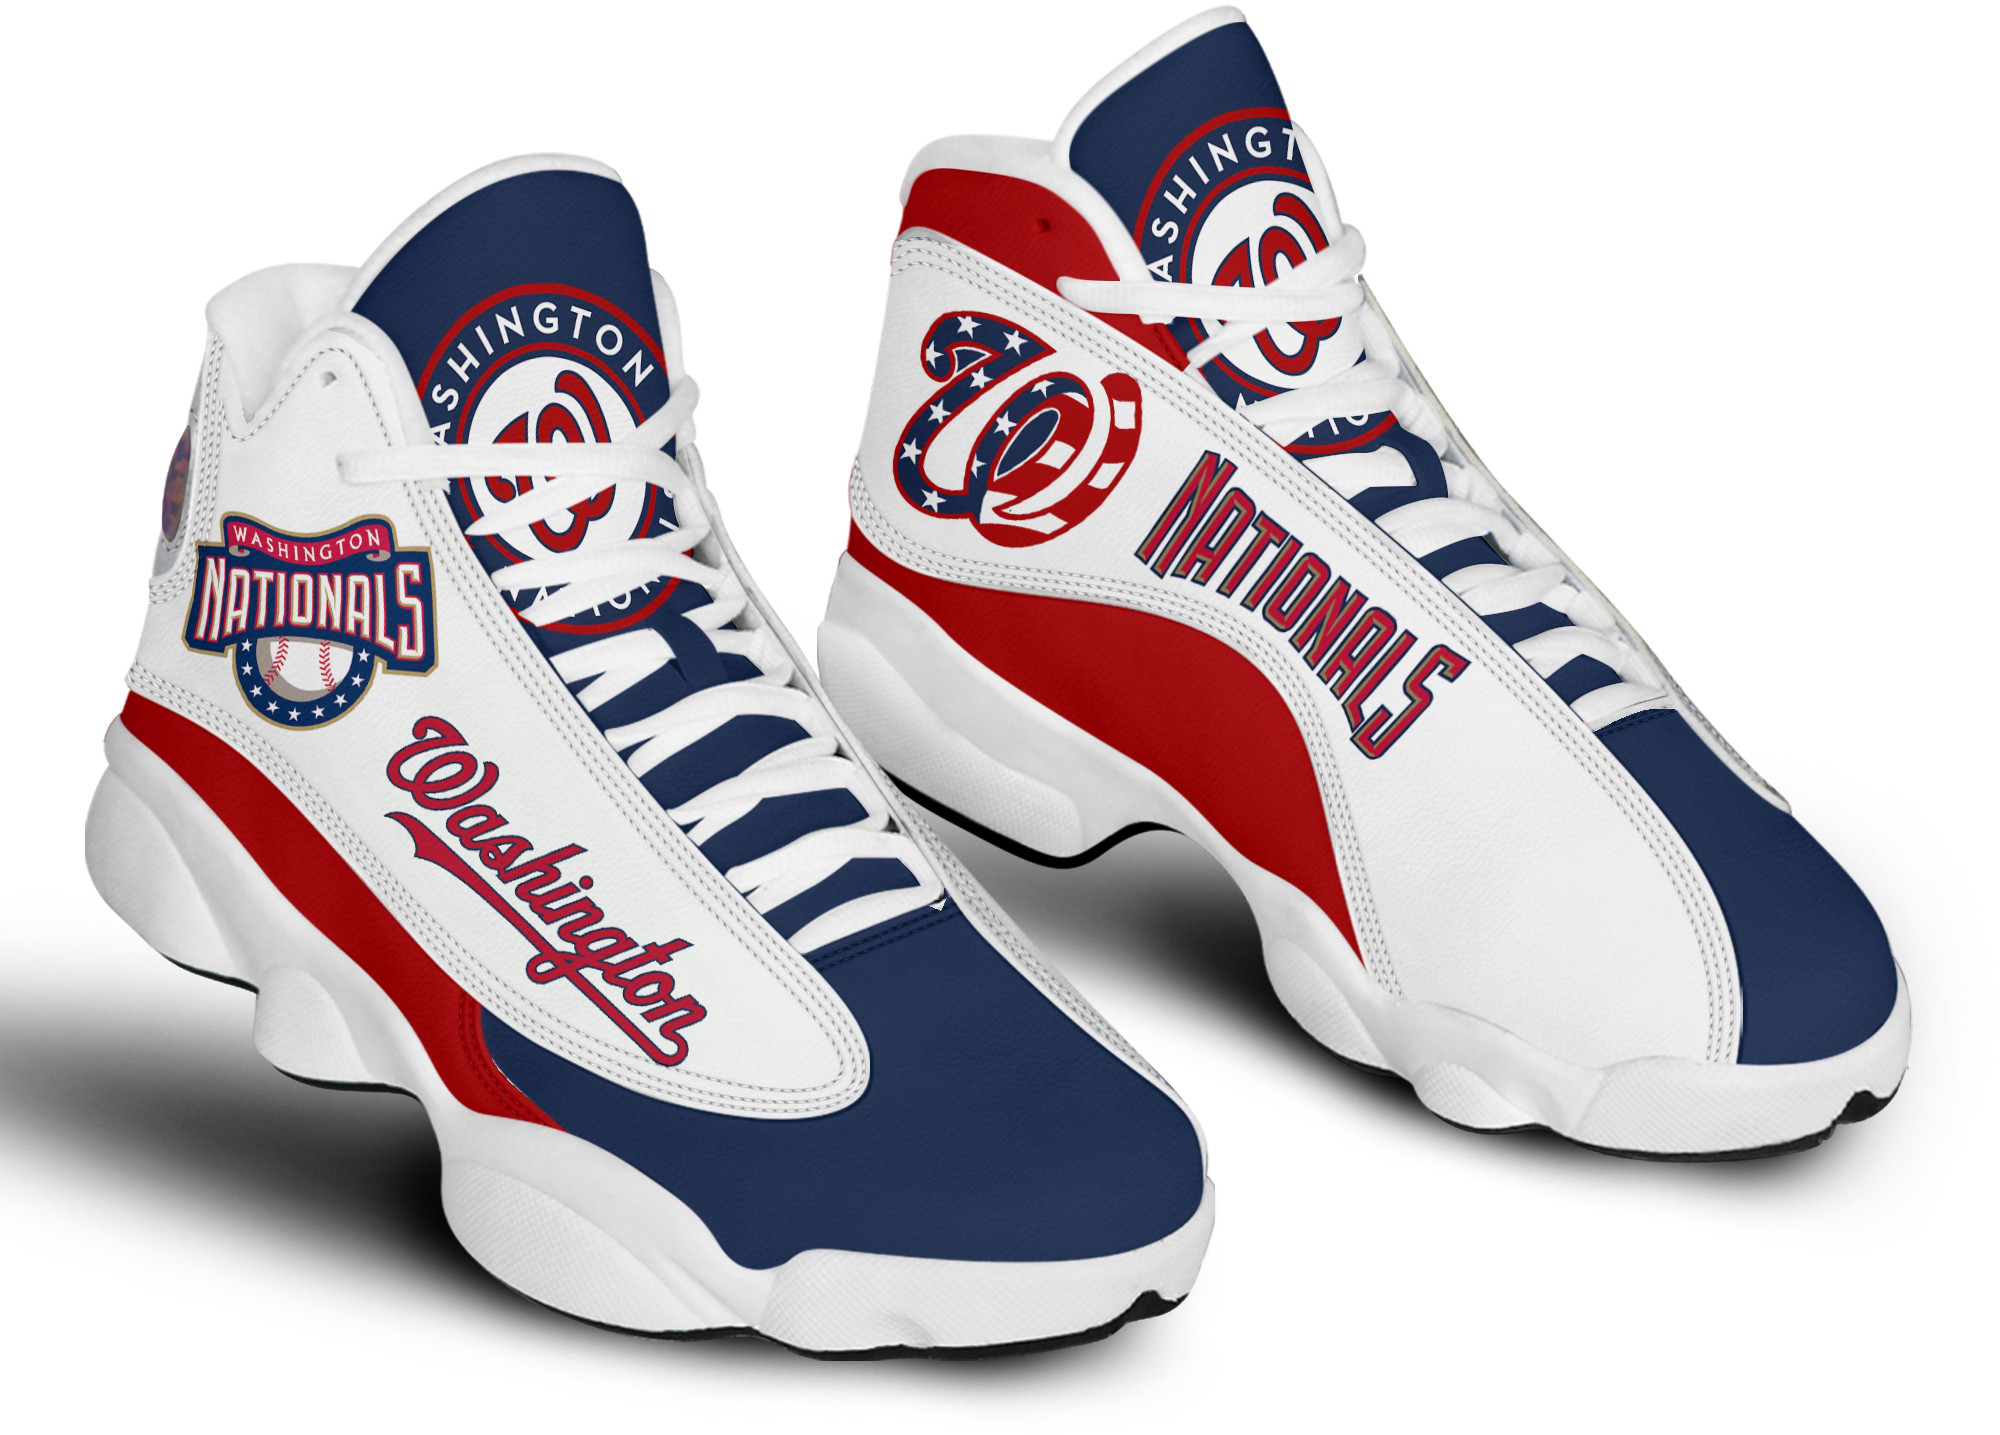 Men's Washington Nationals Limited Edition JD13 Sneakers 001